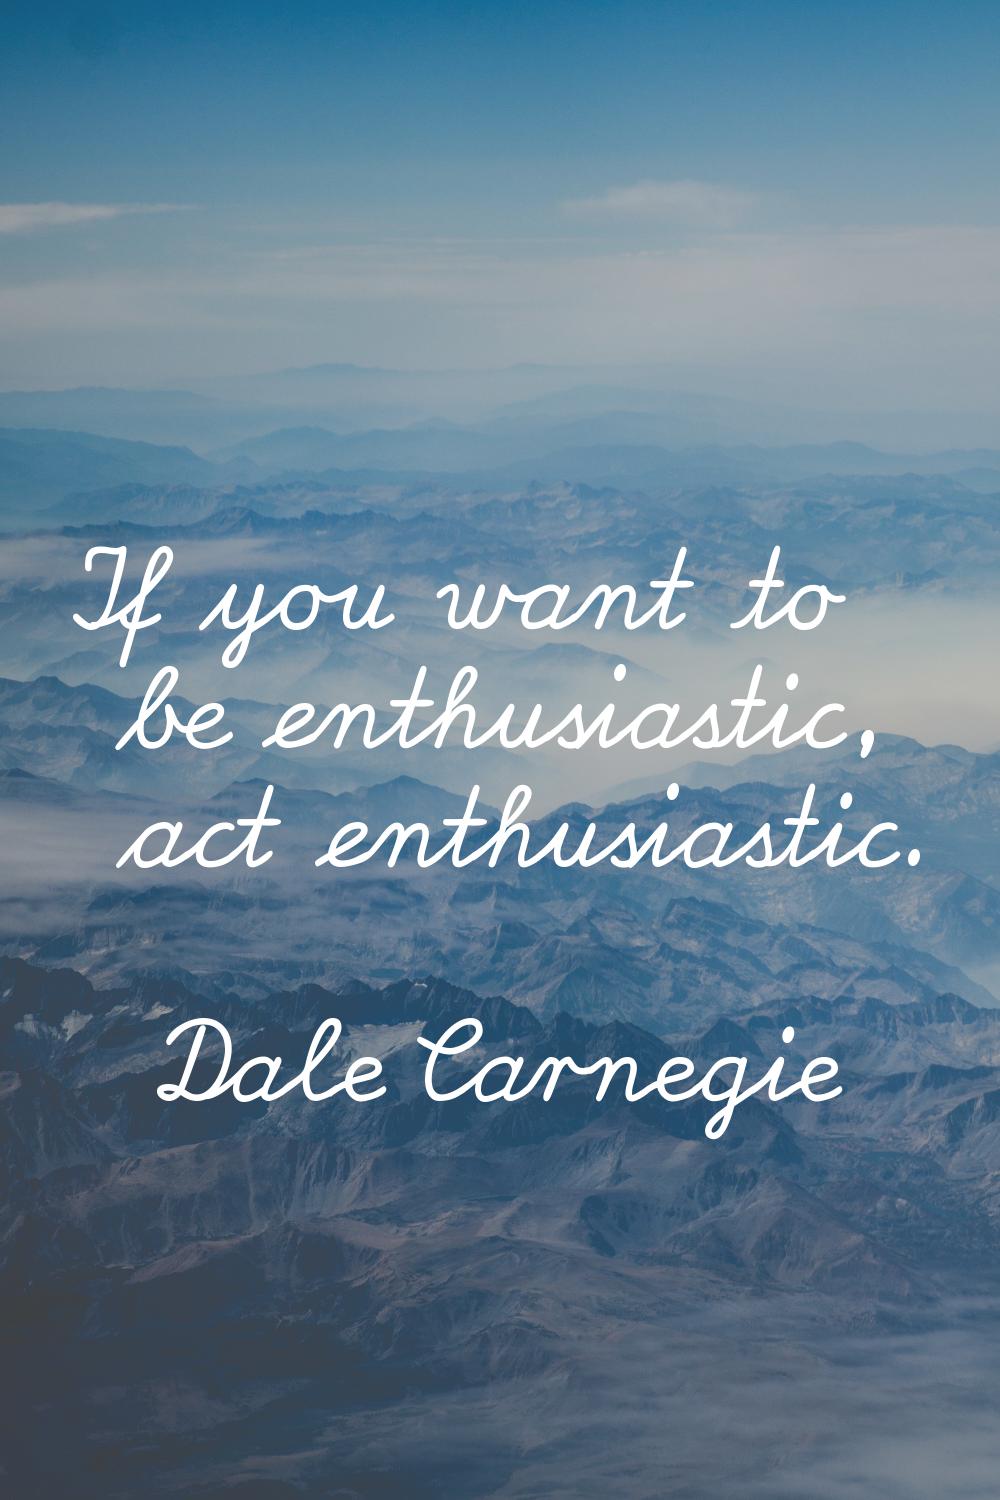 If you want to be enthusiastic, act enthusiastic.